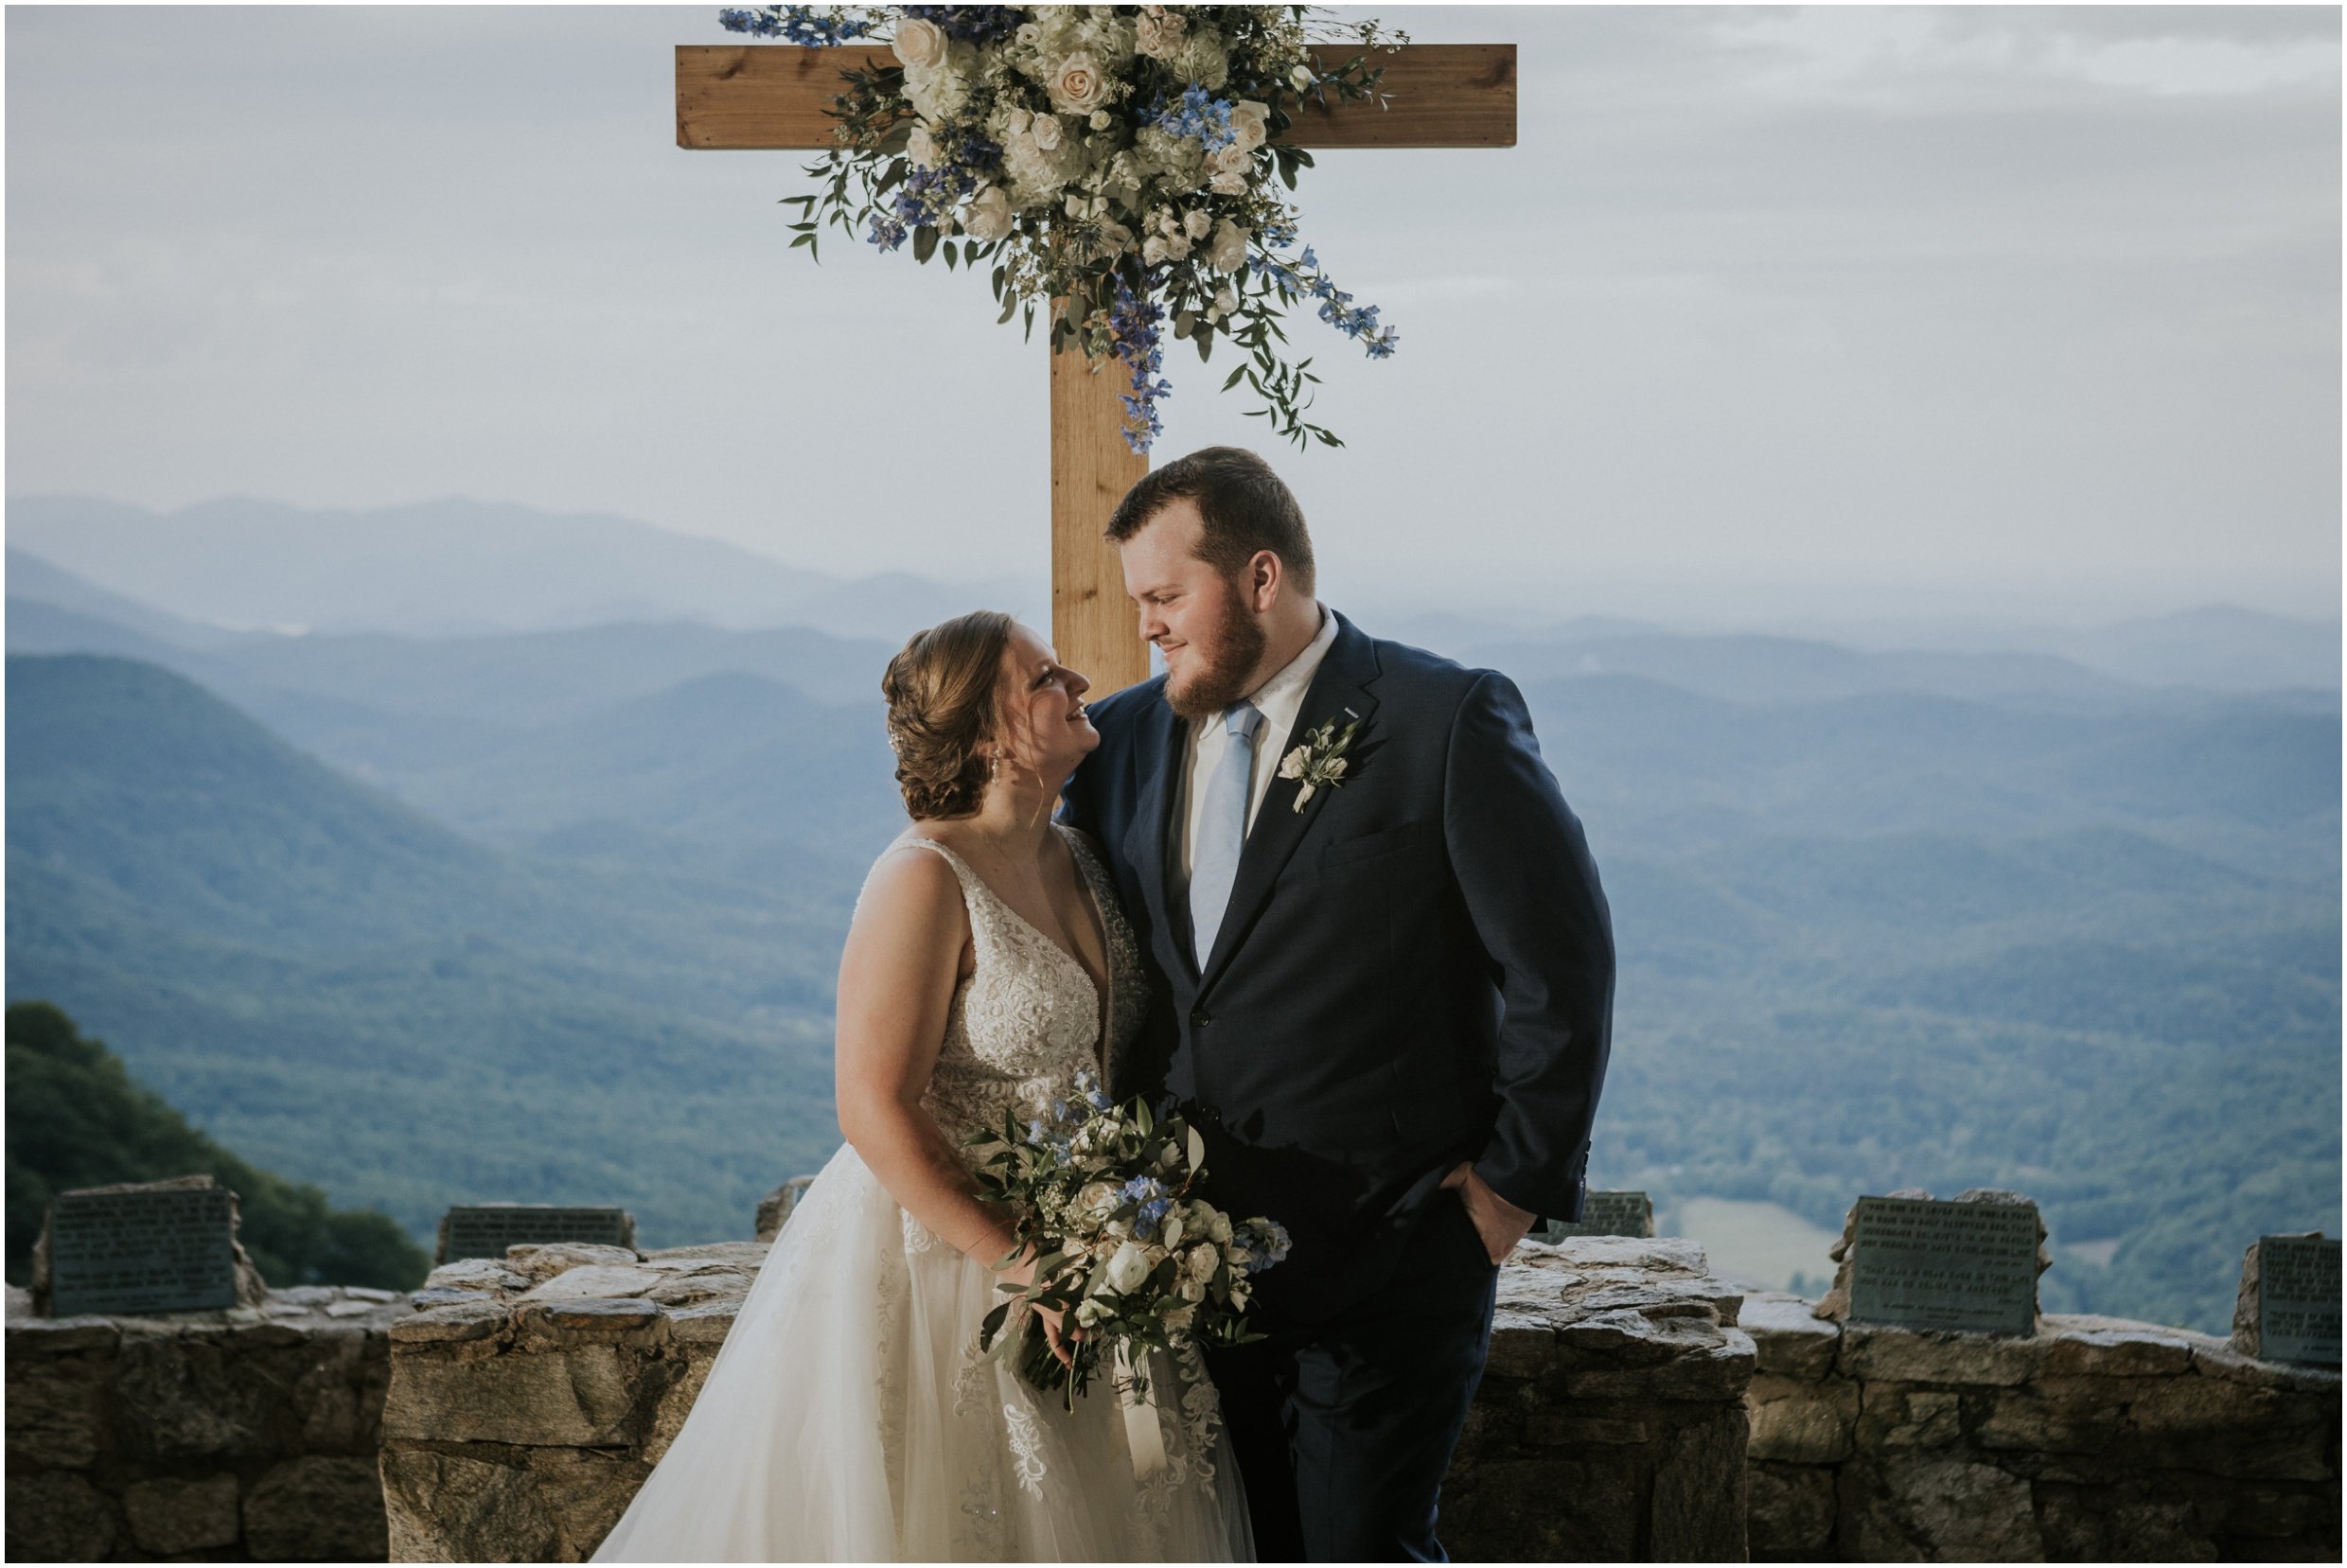 the-pretty-place-fred-symmes-chapel-greenville-sc-brevard-nc-camp-mountain-wedding-south-carolina-tennessee-katy-sergent-photography_0014.jpg